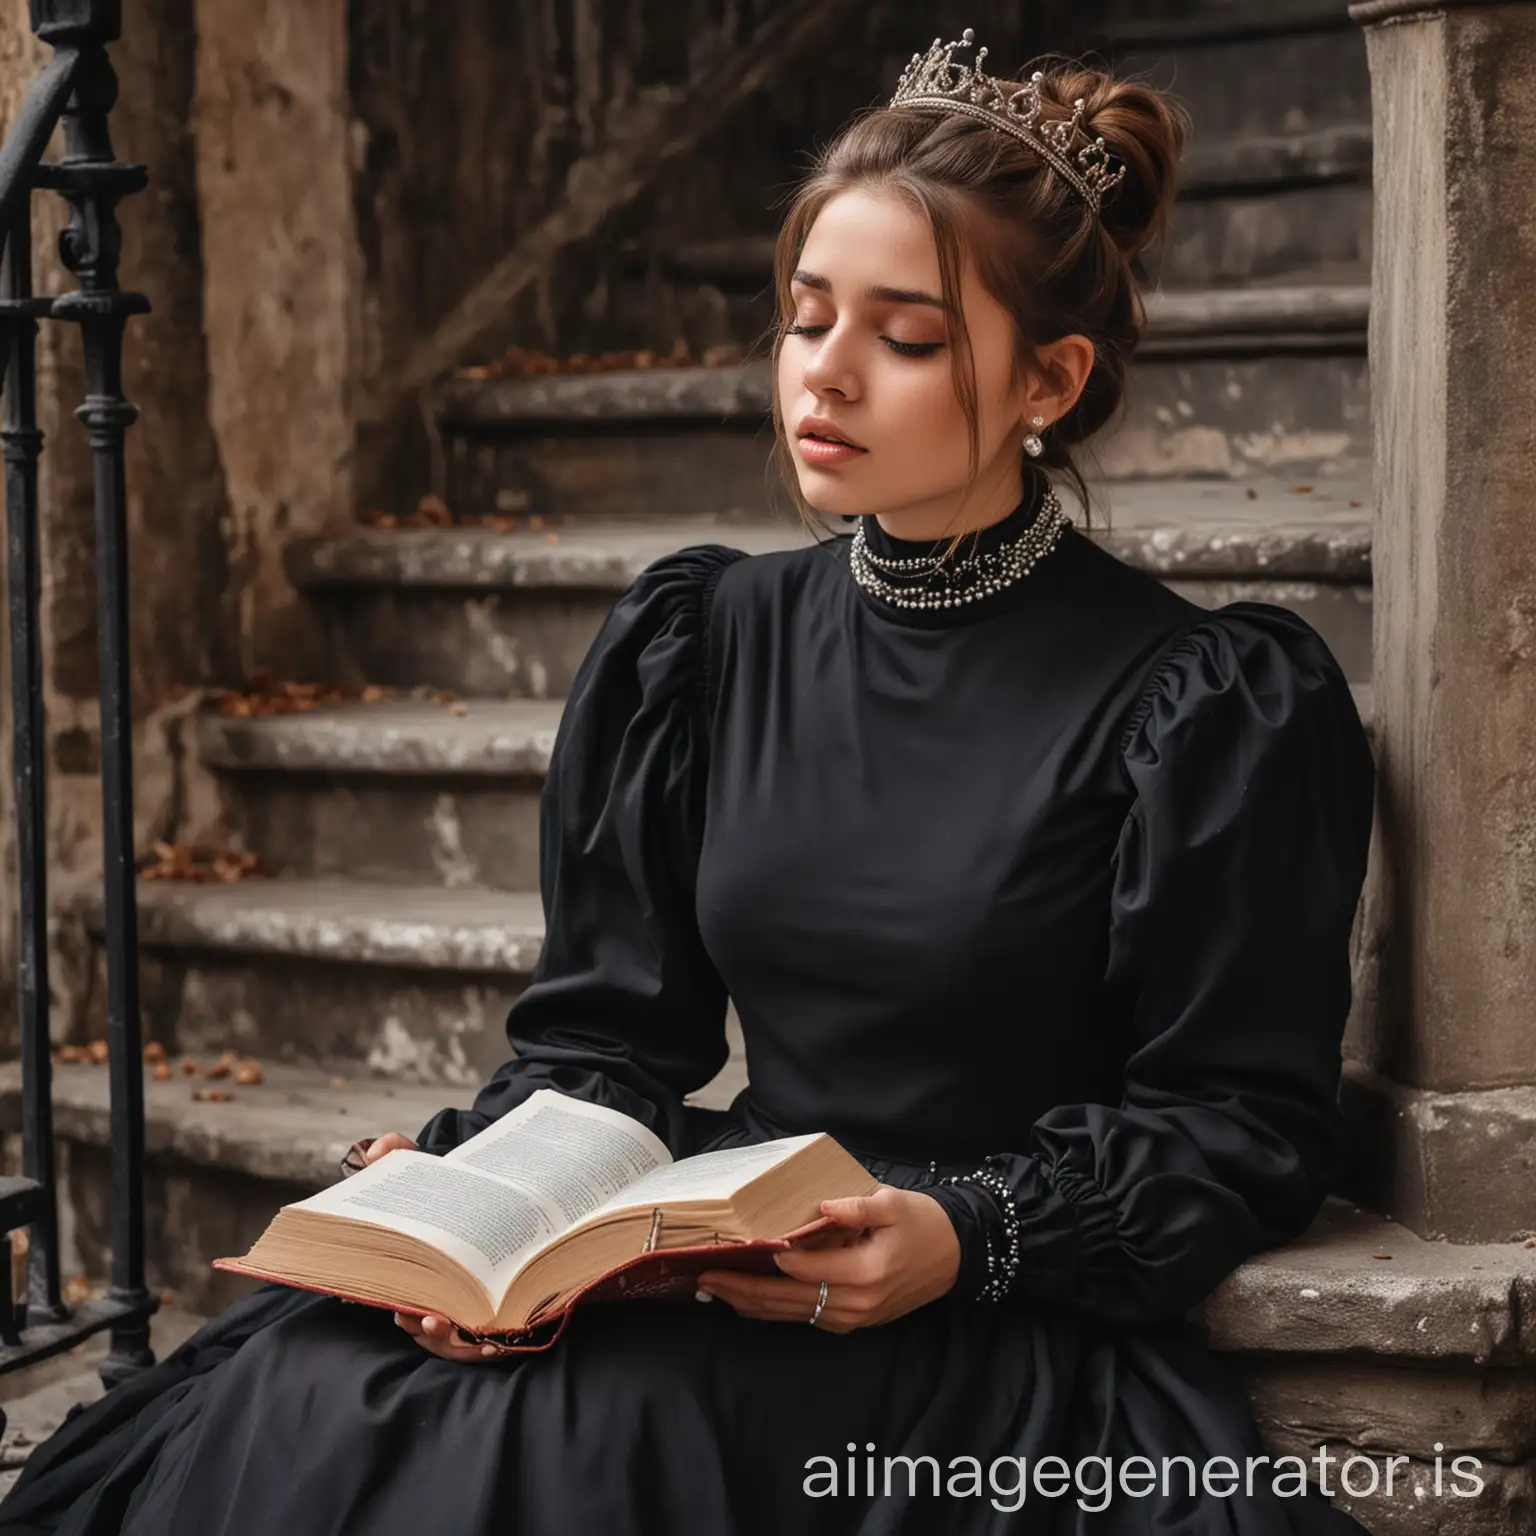 A fair girl with brown high messy hair bun wearing black color turtleneck, full loose sleeves gown, pearl necklace, earrings, crown and bracelet. Sitting alone in castle stairs and reading book. Eyes are closed and head down. Sad face.